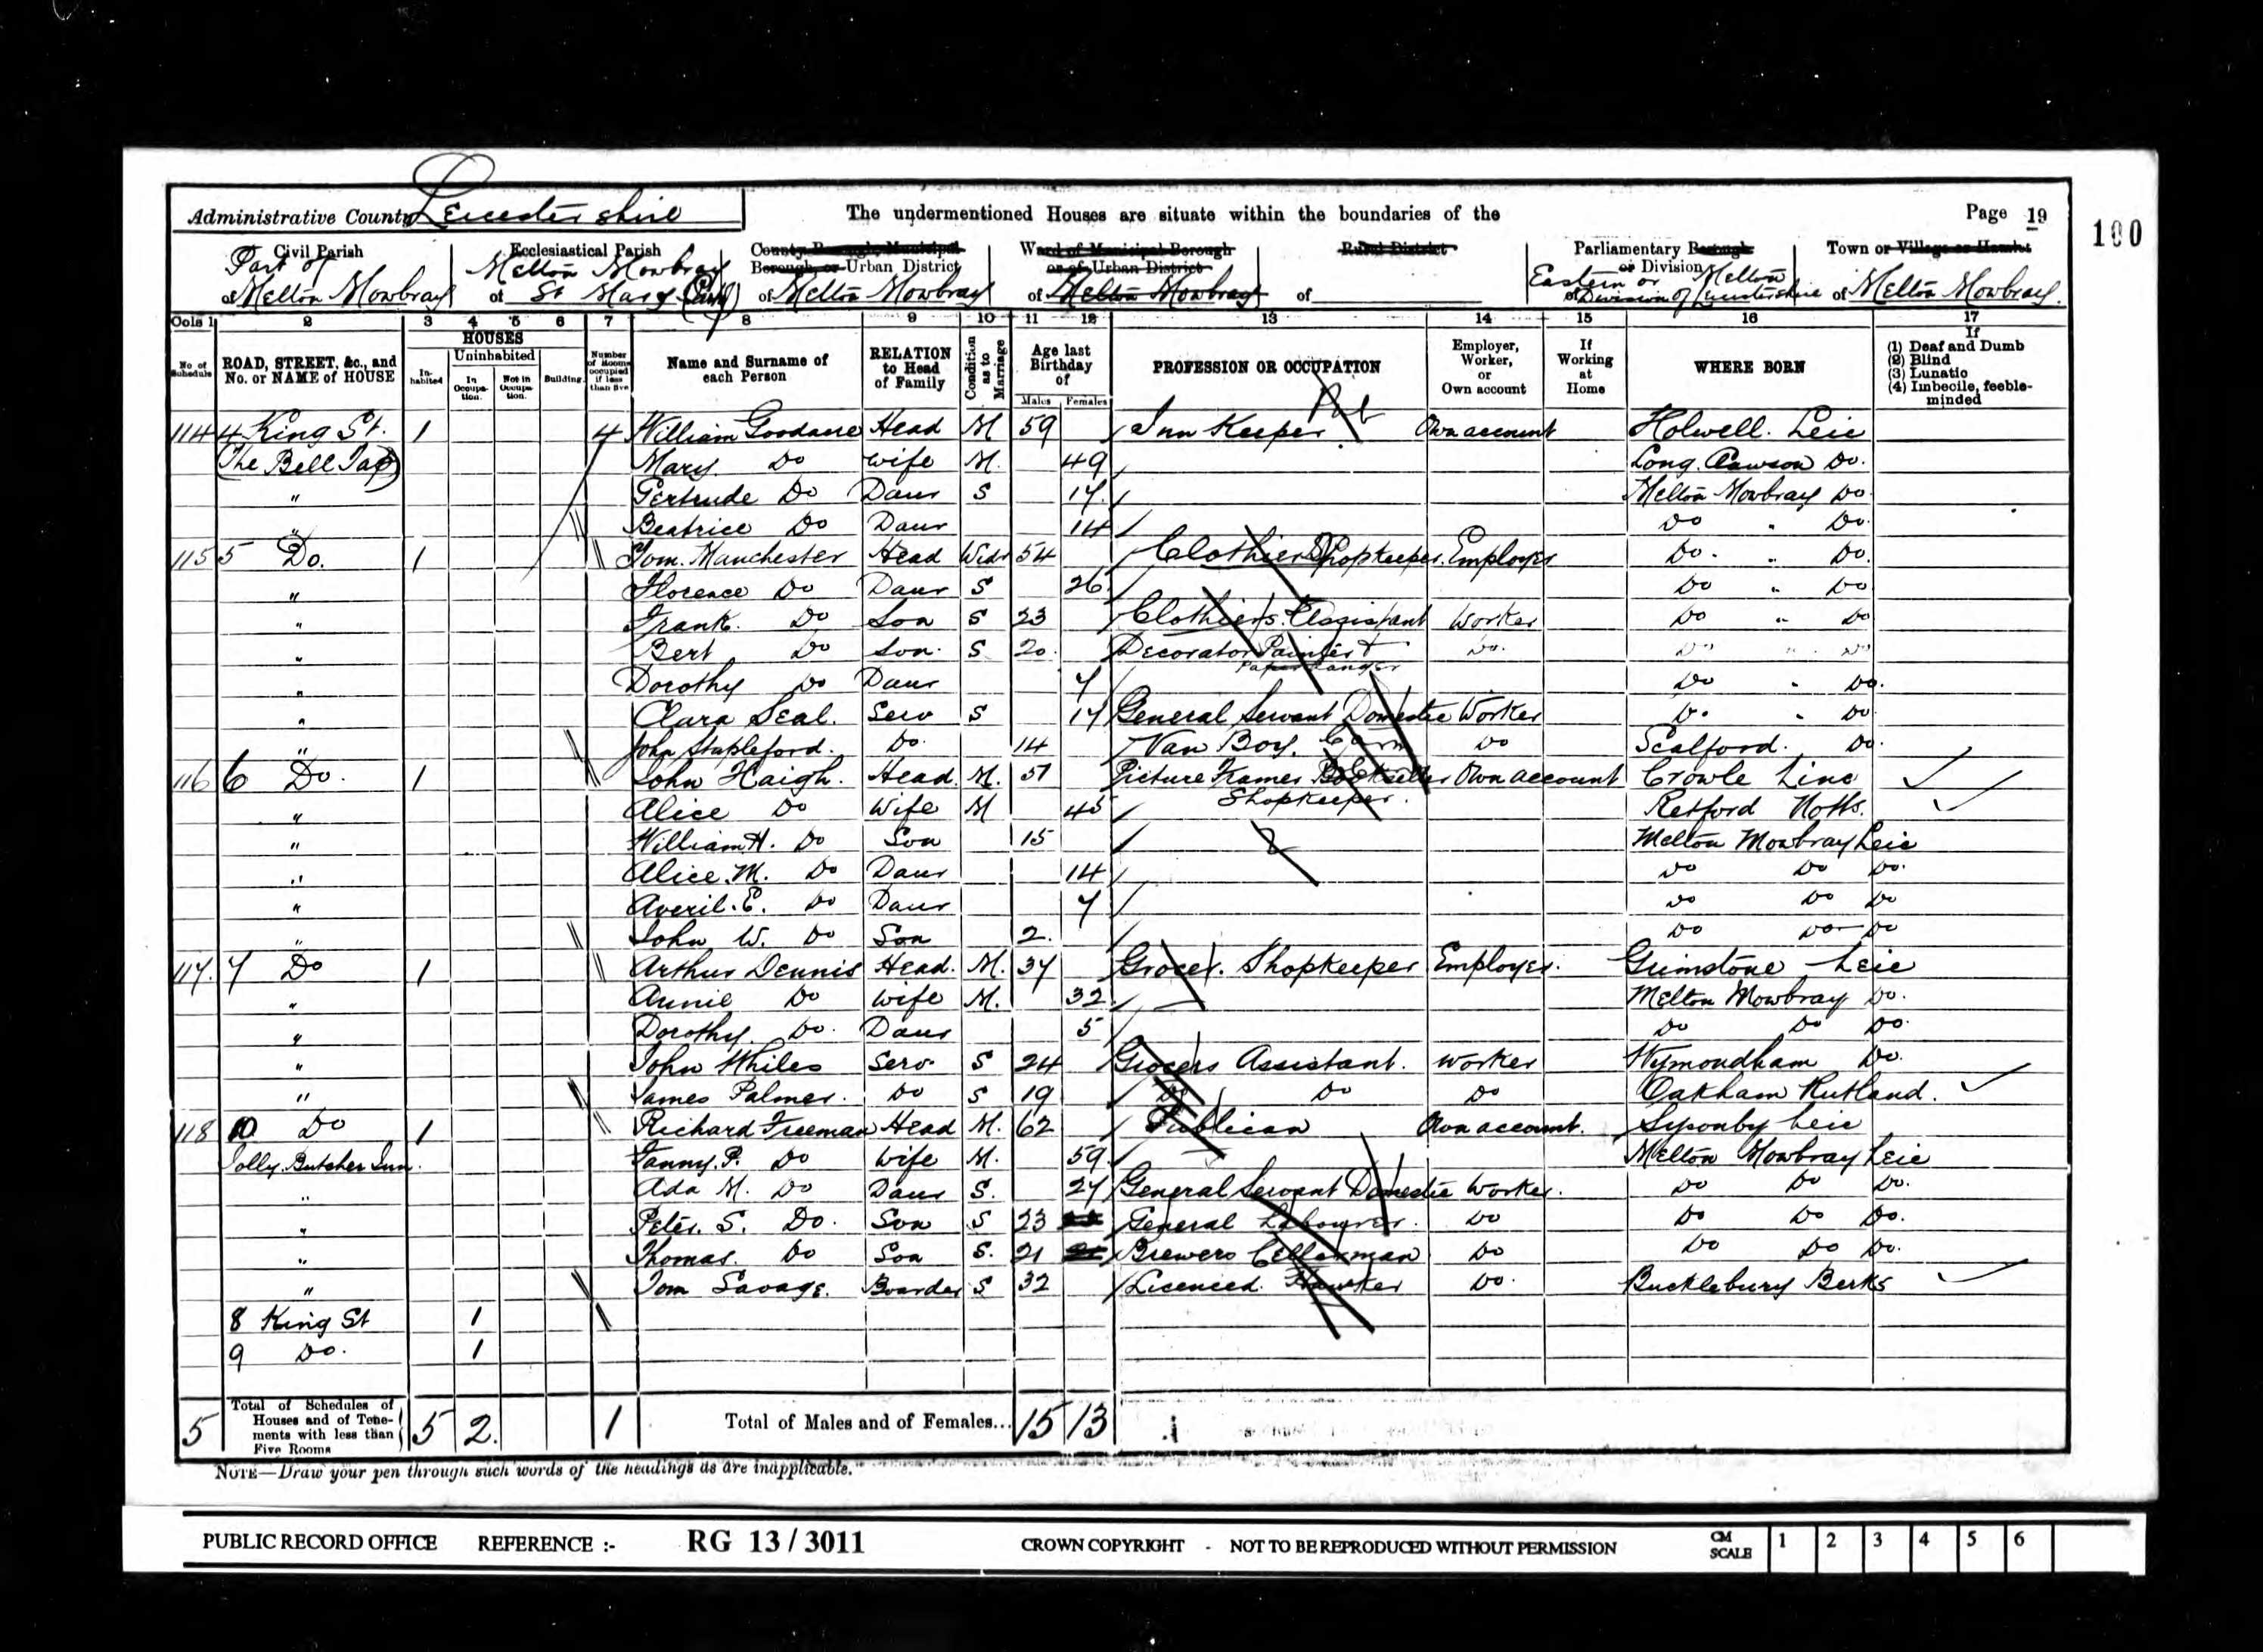 1901 record of family and maiden name